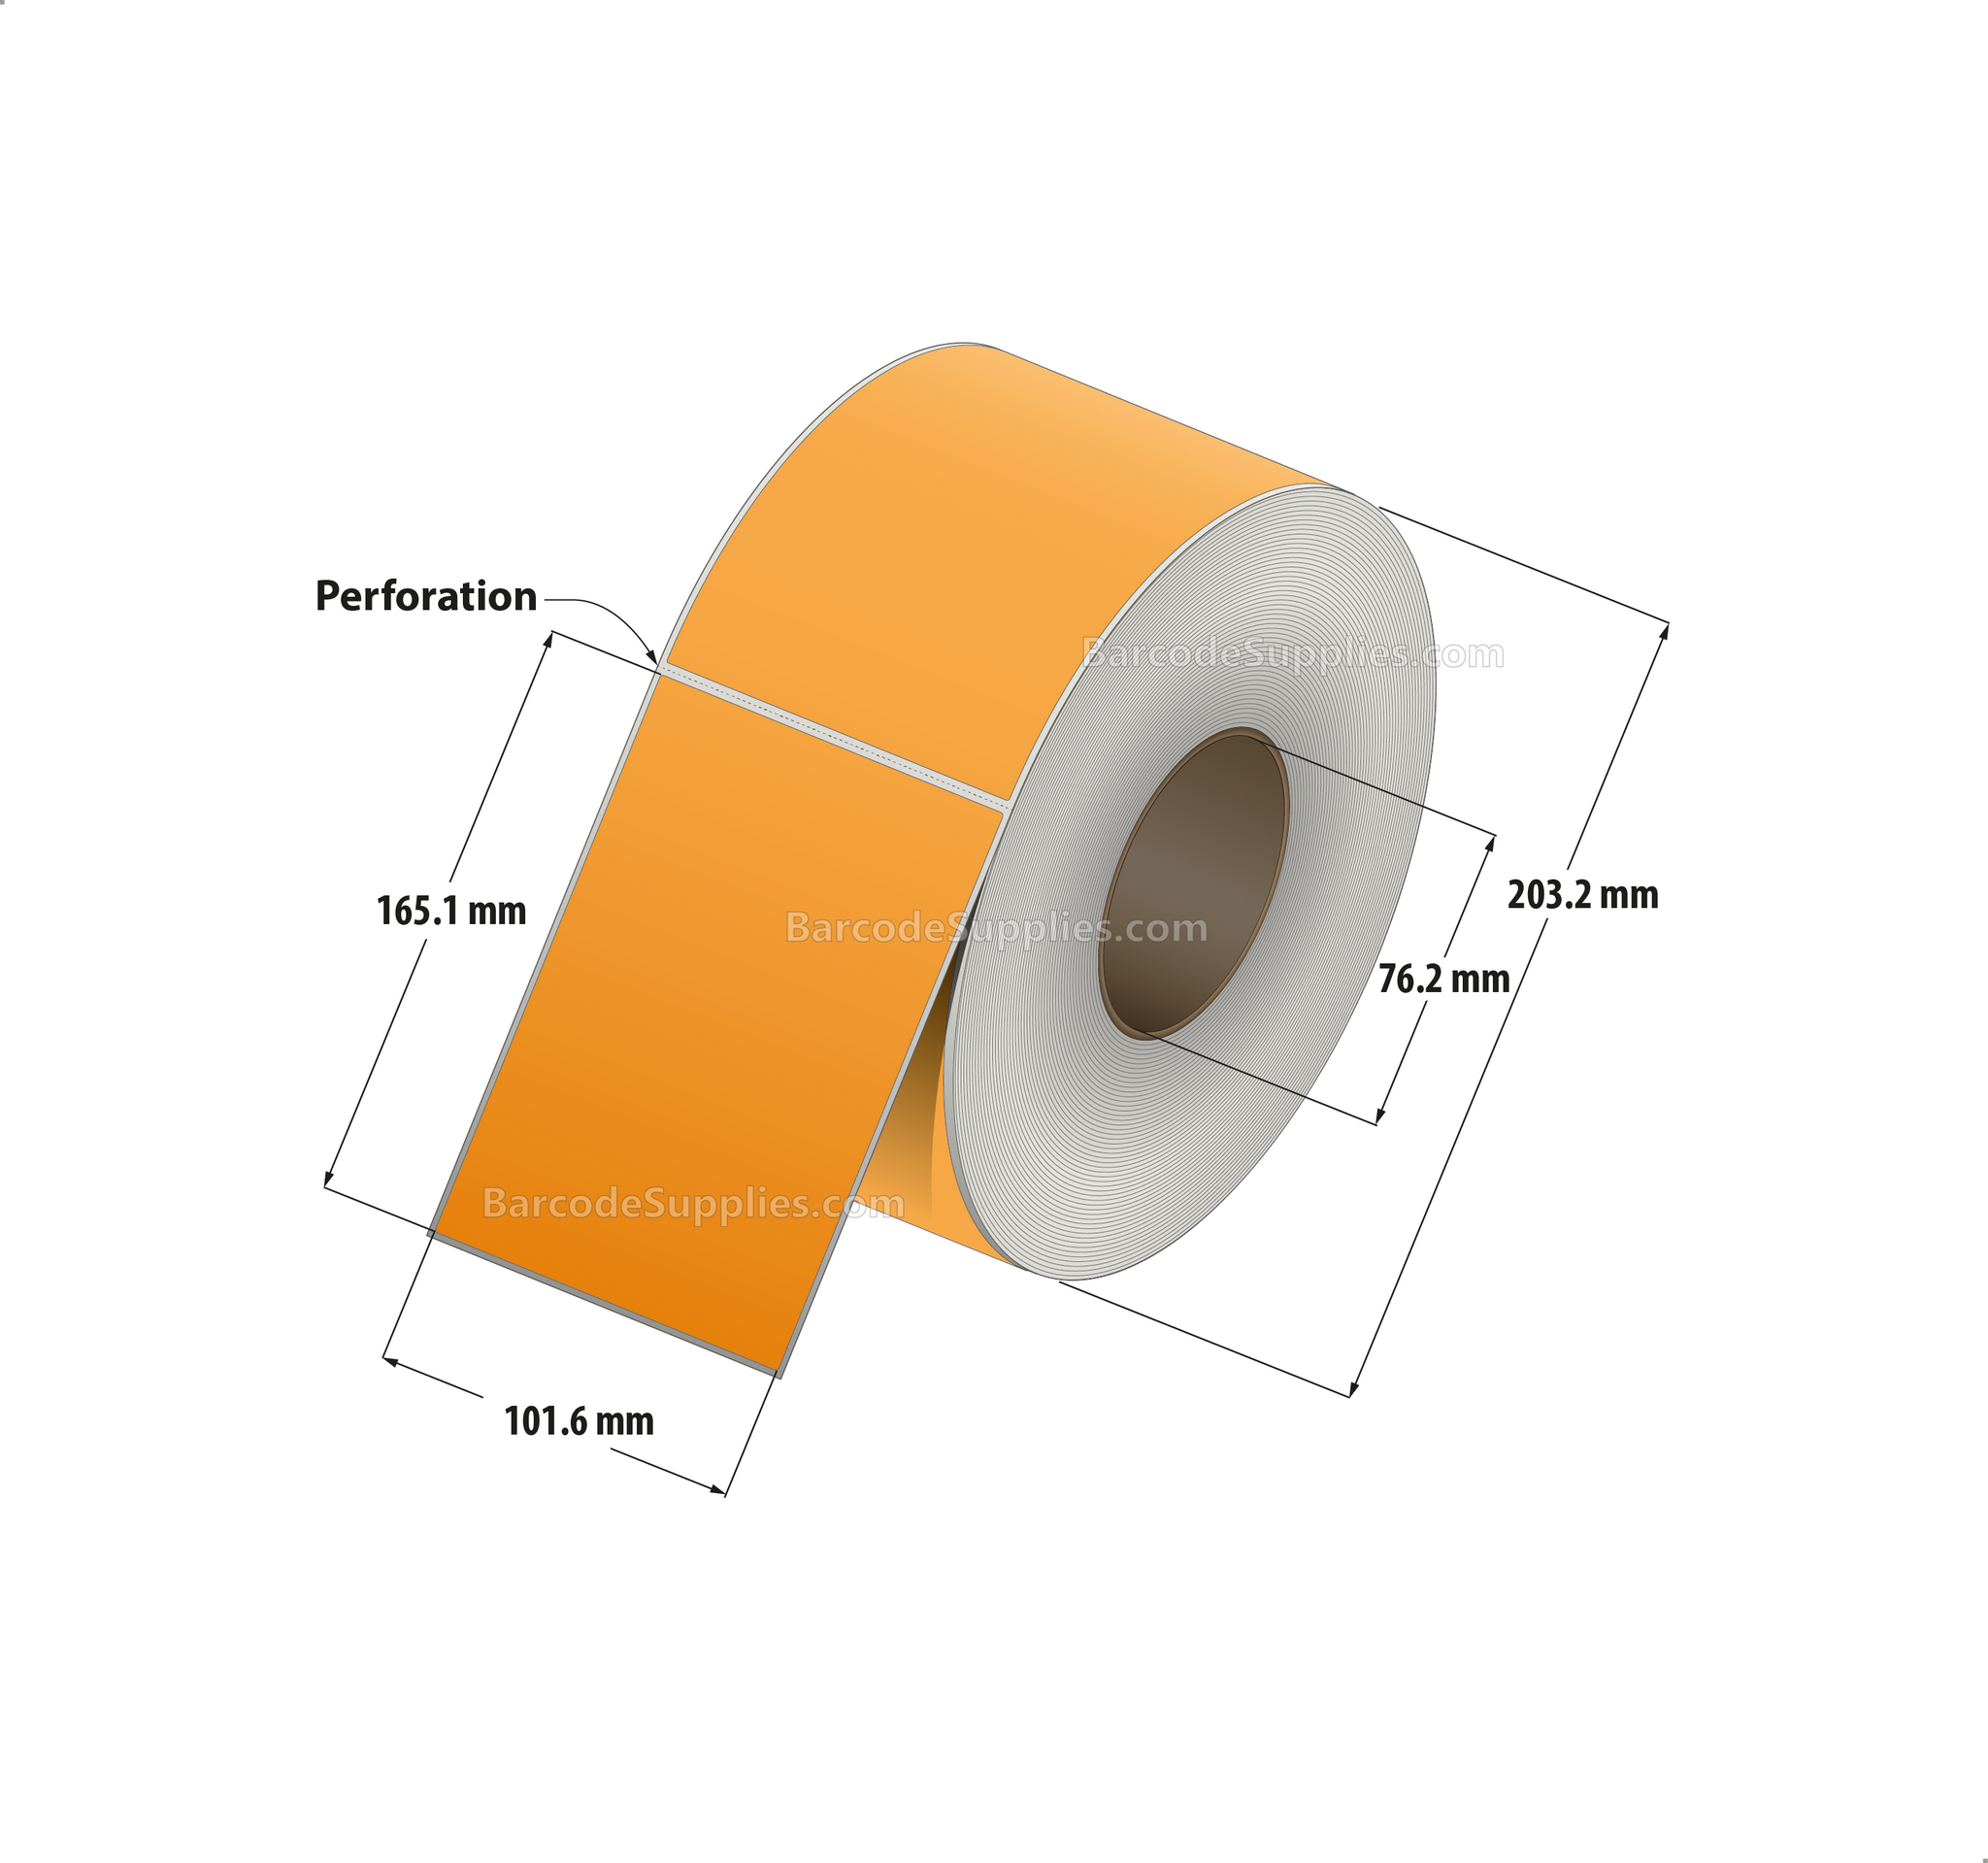 4 x 6.5 Thermal Transfer 136 Orange Labels With Permanent Acrylic Adhesive - Perforated - 900 Labels Per Roll - Carton Of 4 Rolls - 3600 Labels Total - MPN: TH465-1PO